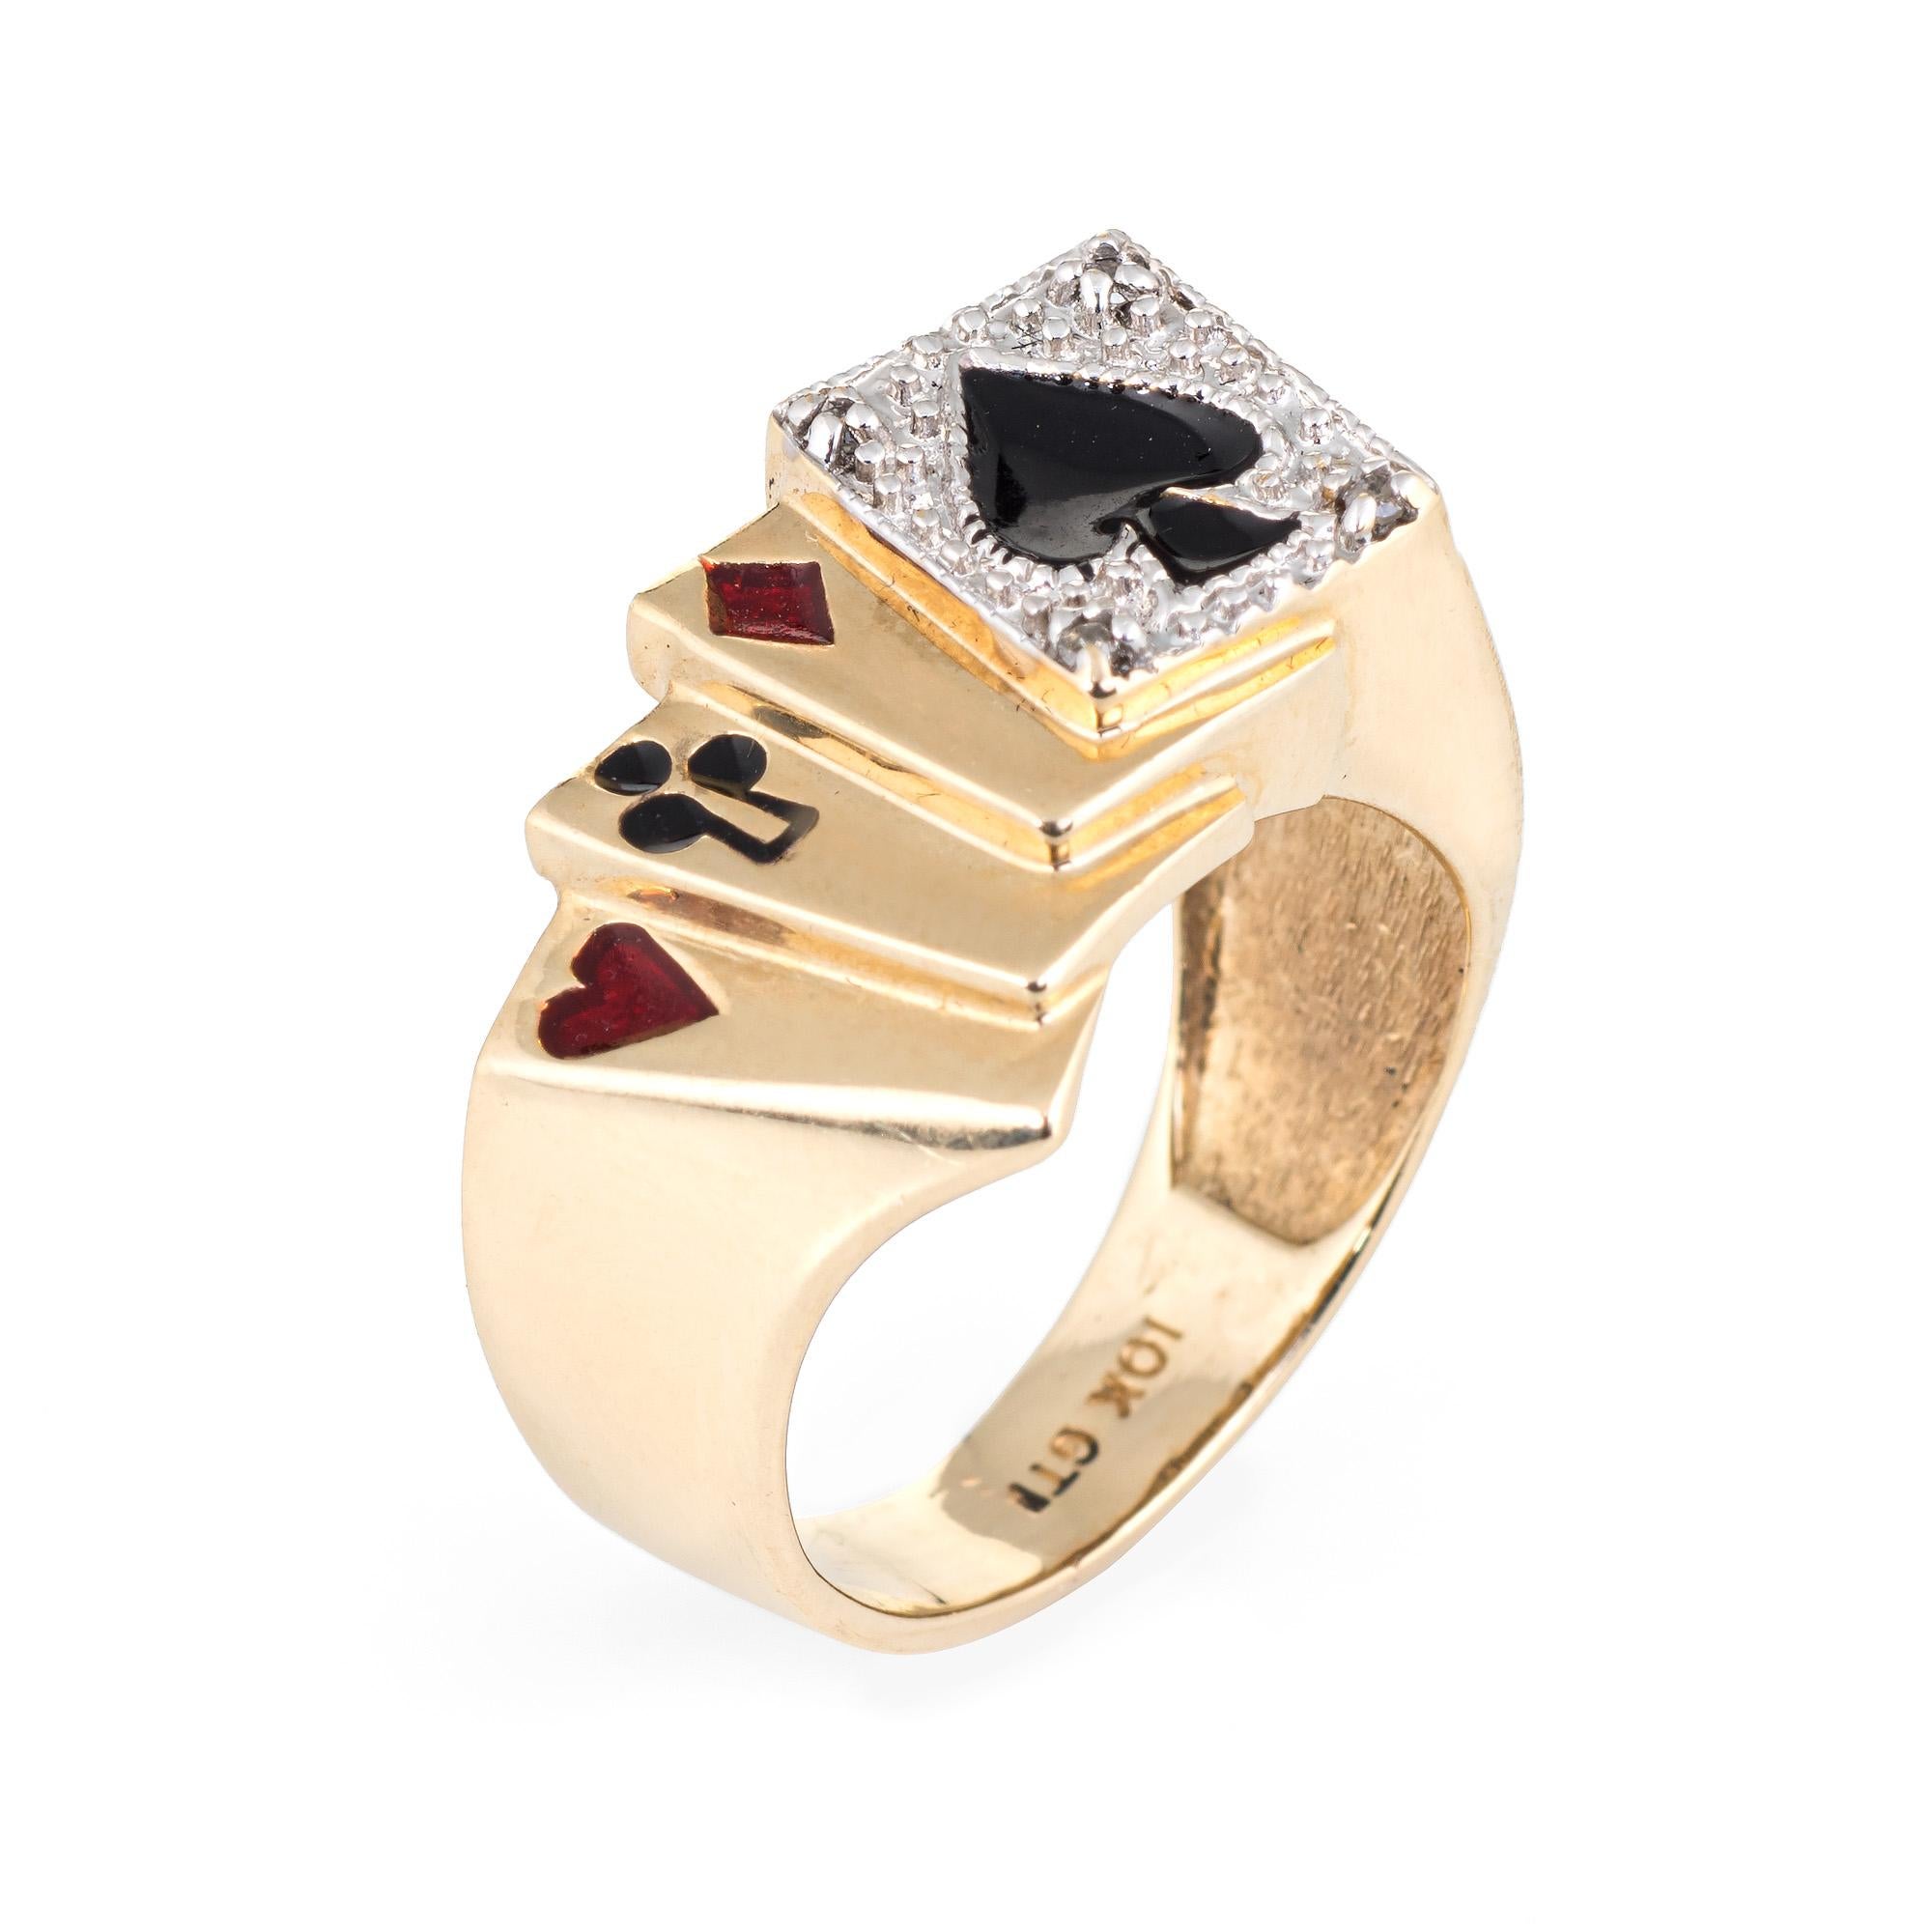 Vintage deck of cards ring crafted in 10 karat yellow gold. 

Four single cut diamonds total an estimated 0.02 carats (estimated at H-I color and I3 clarity).

A fun ring to commemorate a trip to your favorite gambling spot. Red and black enameled